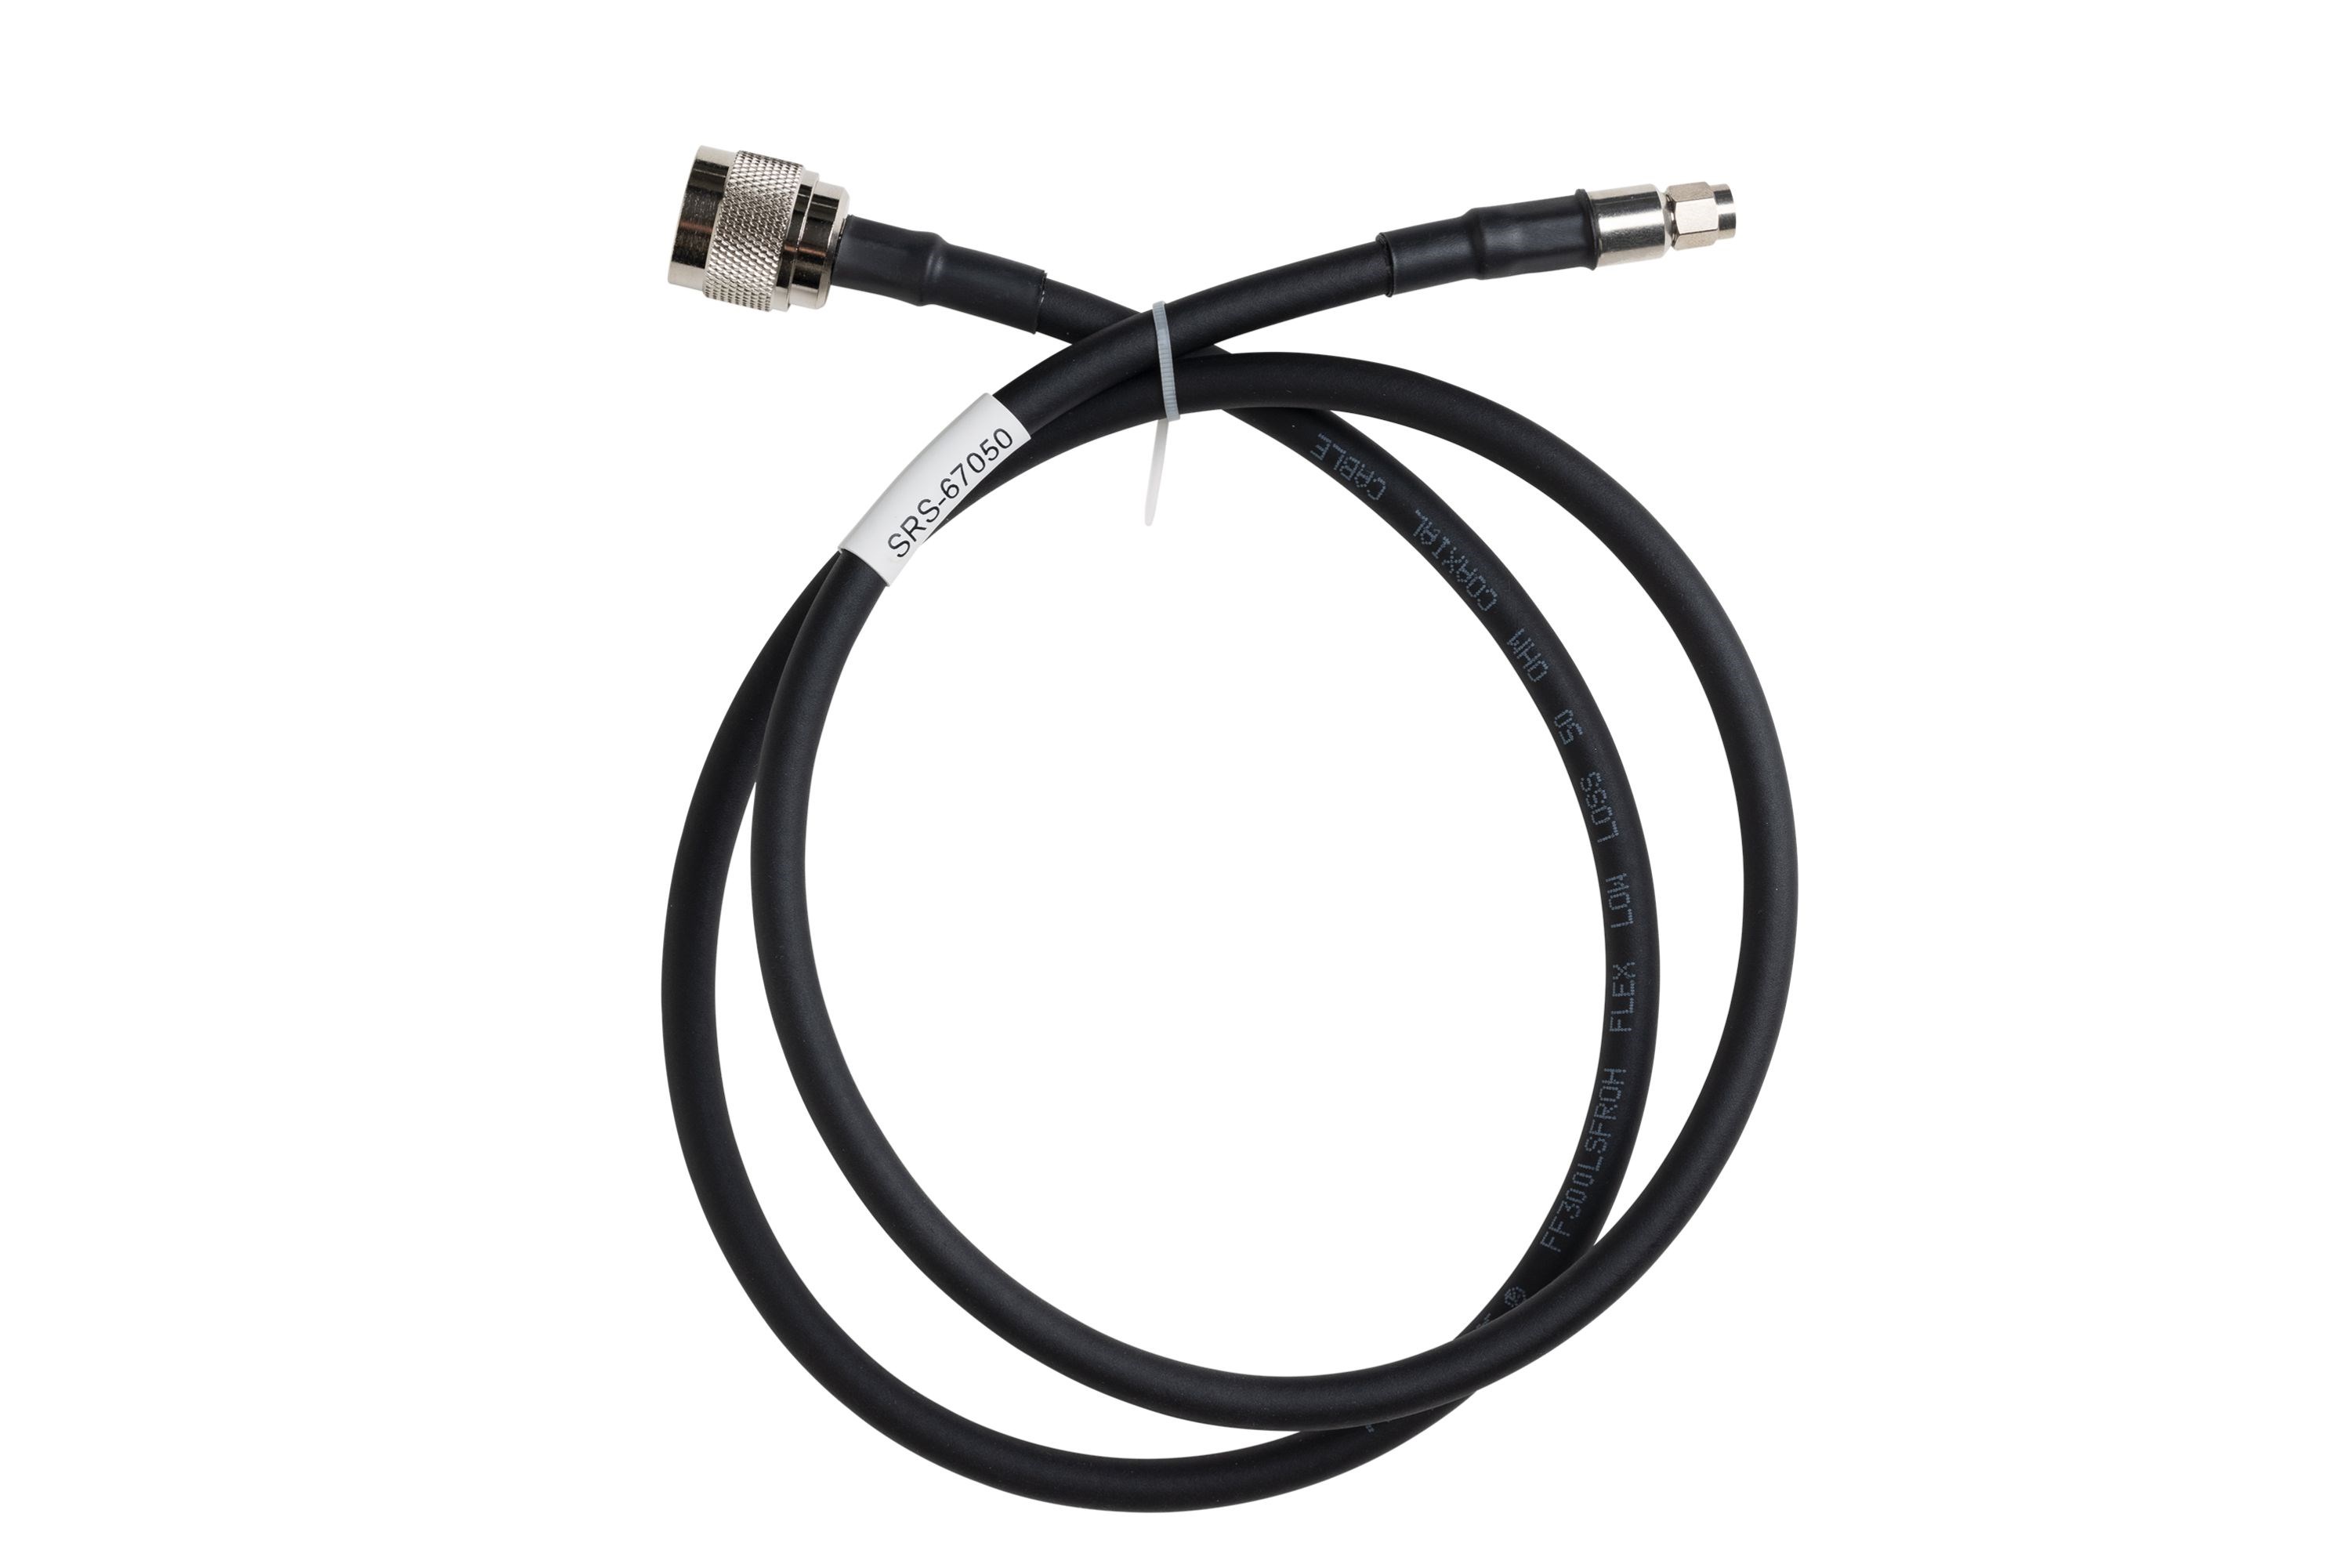 SMA-to-N Antenna Cable, 300mm or 100mm